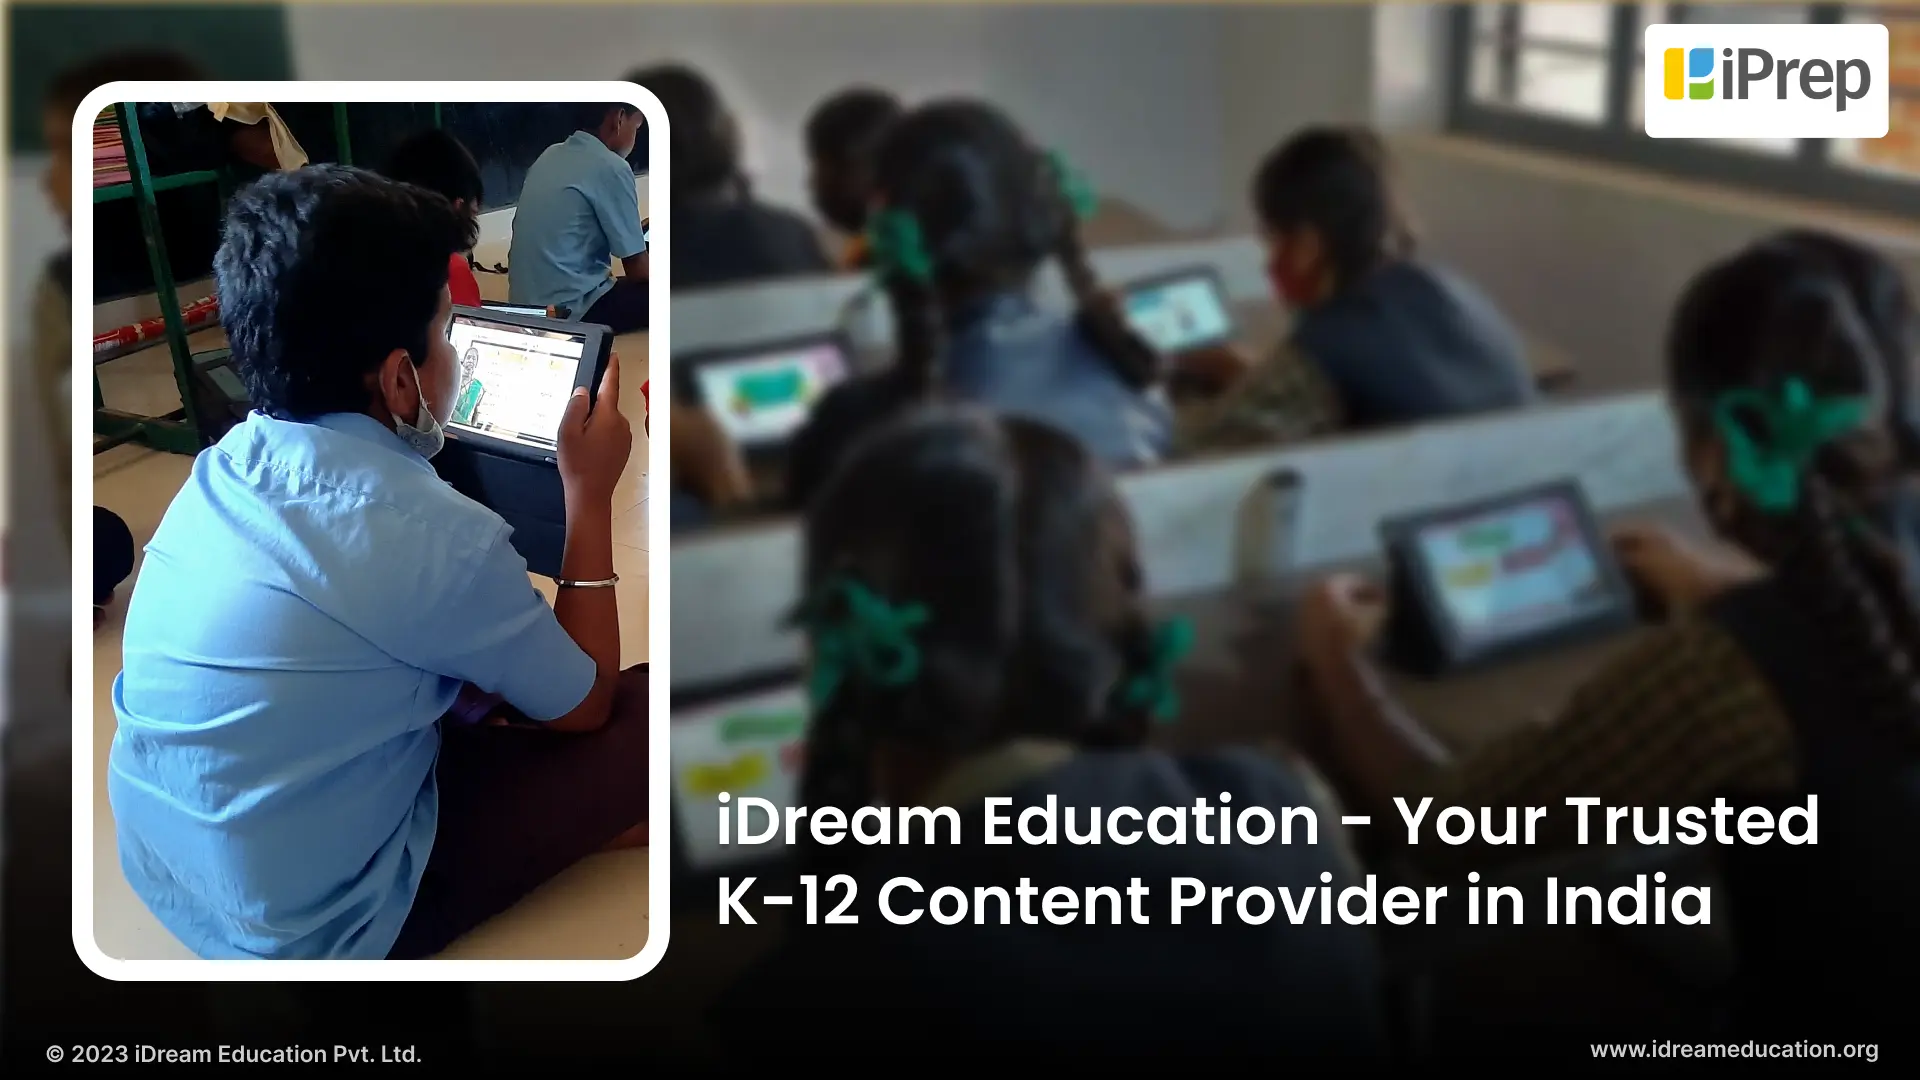 A visual depiction of iDream Education as a trusted and reliable K12 content provider in India with its comprehensive set of digital learning solutions